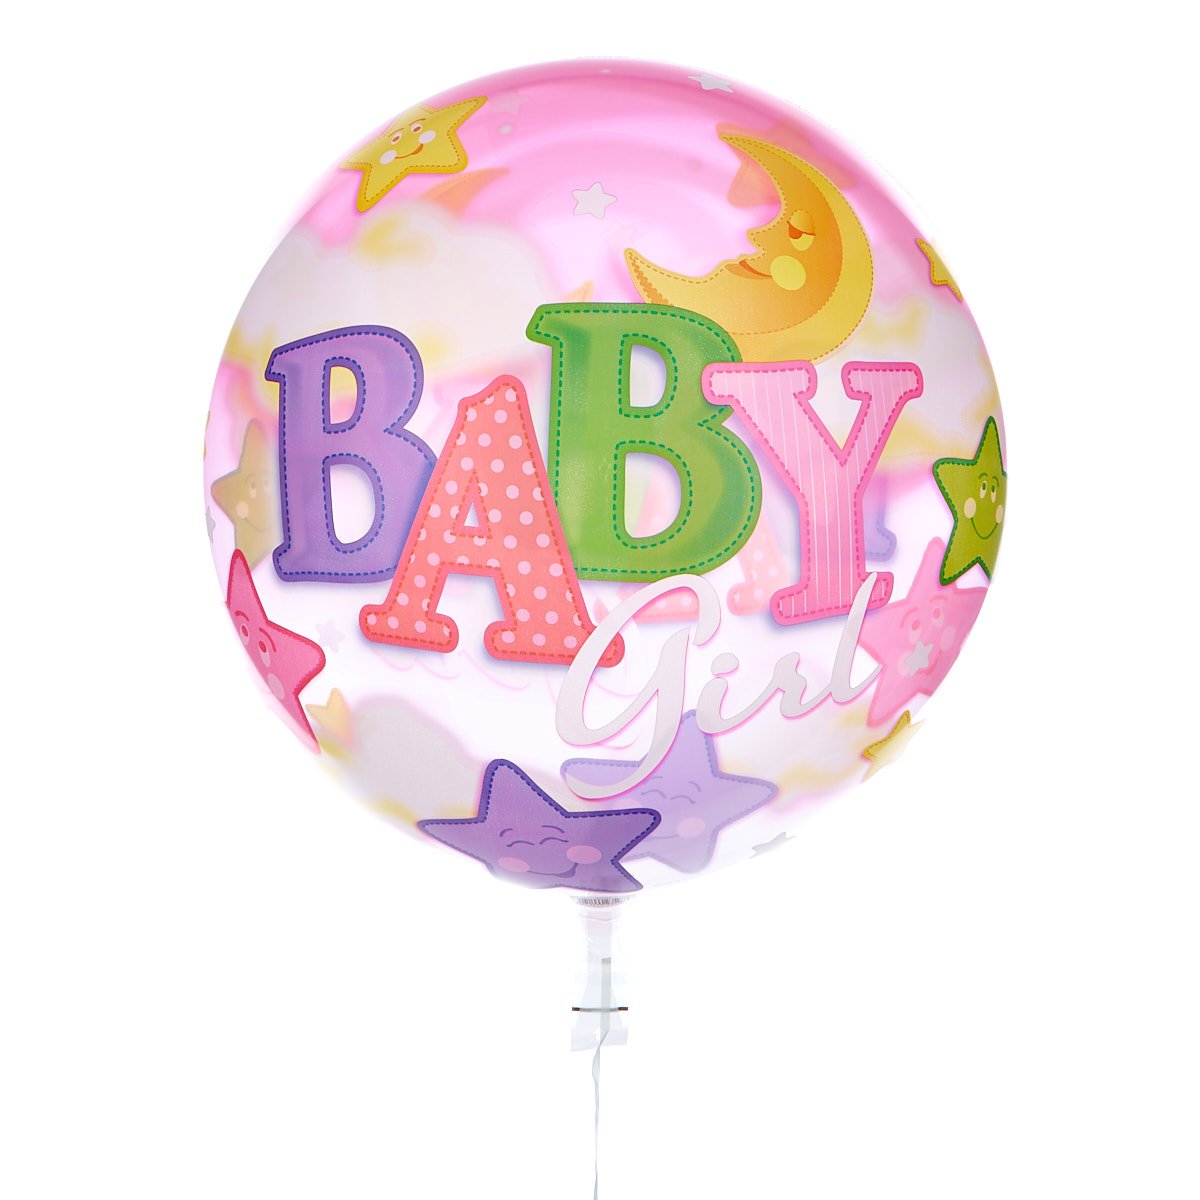 22-Inch Bubble Balloon - Baby Girl - DELIVERED INFLATED!